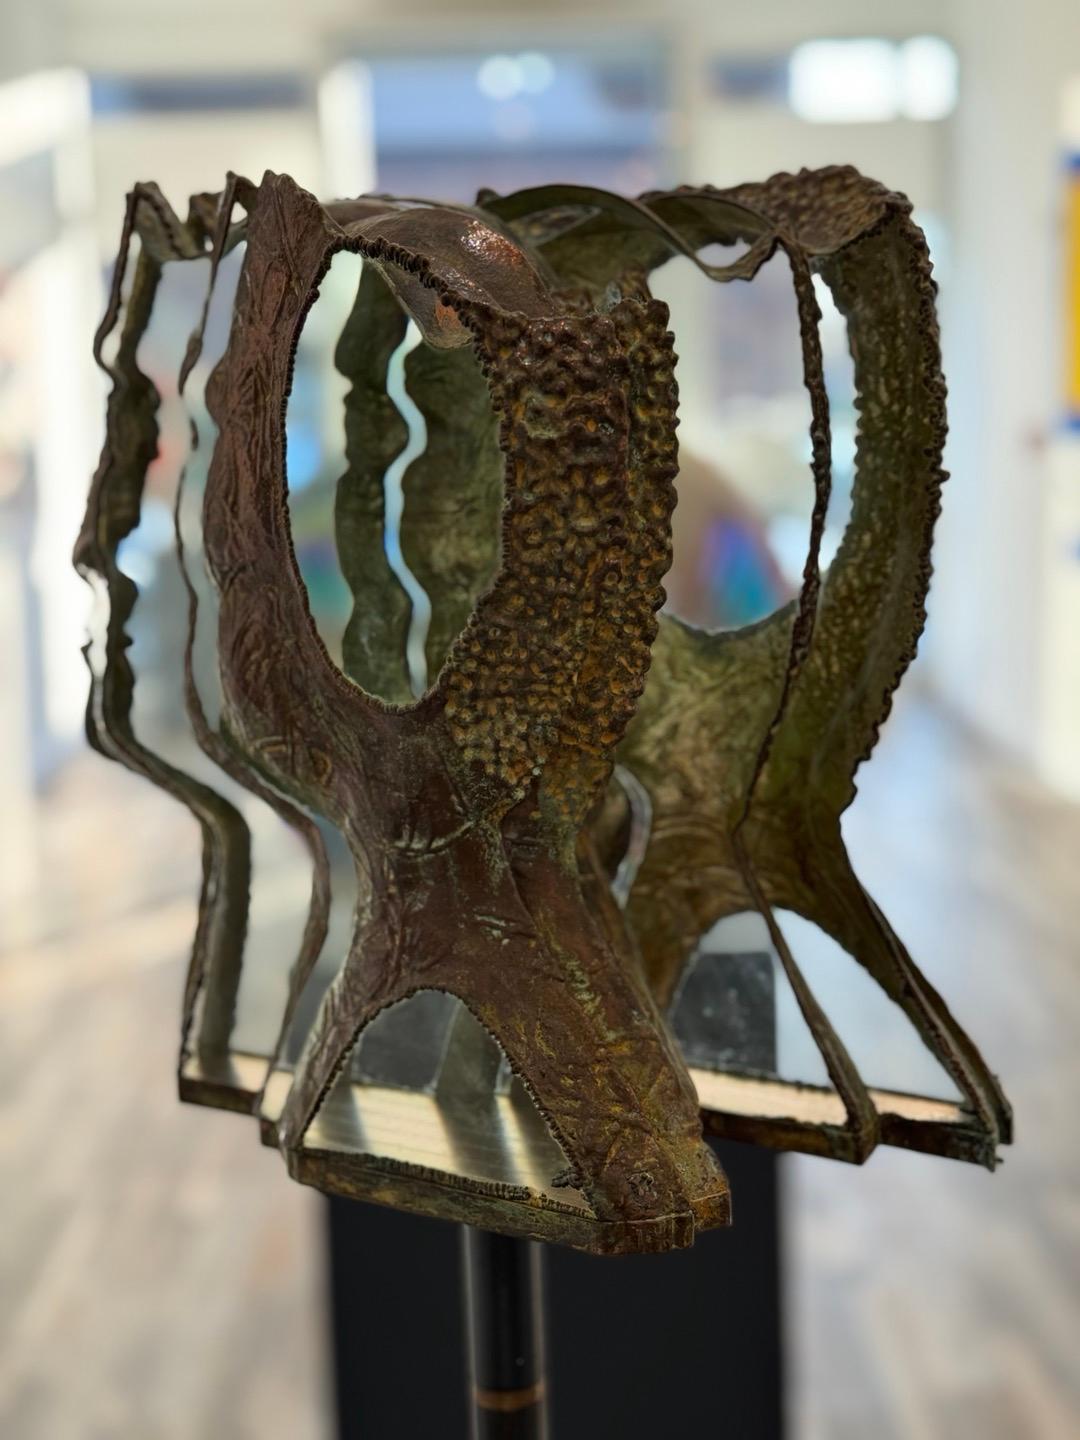 Louis Sclafani’s exploration in glass began as an undergraduate majoring in ceramics at Alfred University, Alfred, New York.  In 1976, Louis spent a semester abroad studying ceramics at the Siena School of Art, Italy.  On a field trip to Venice, he